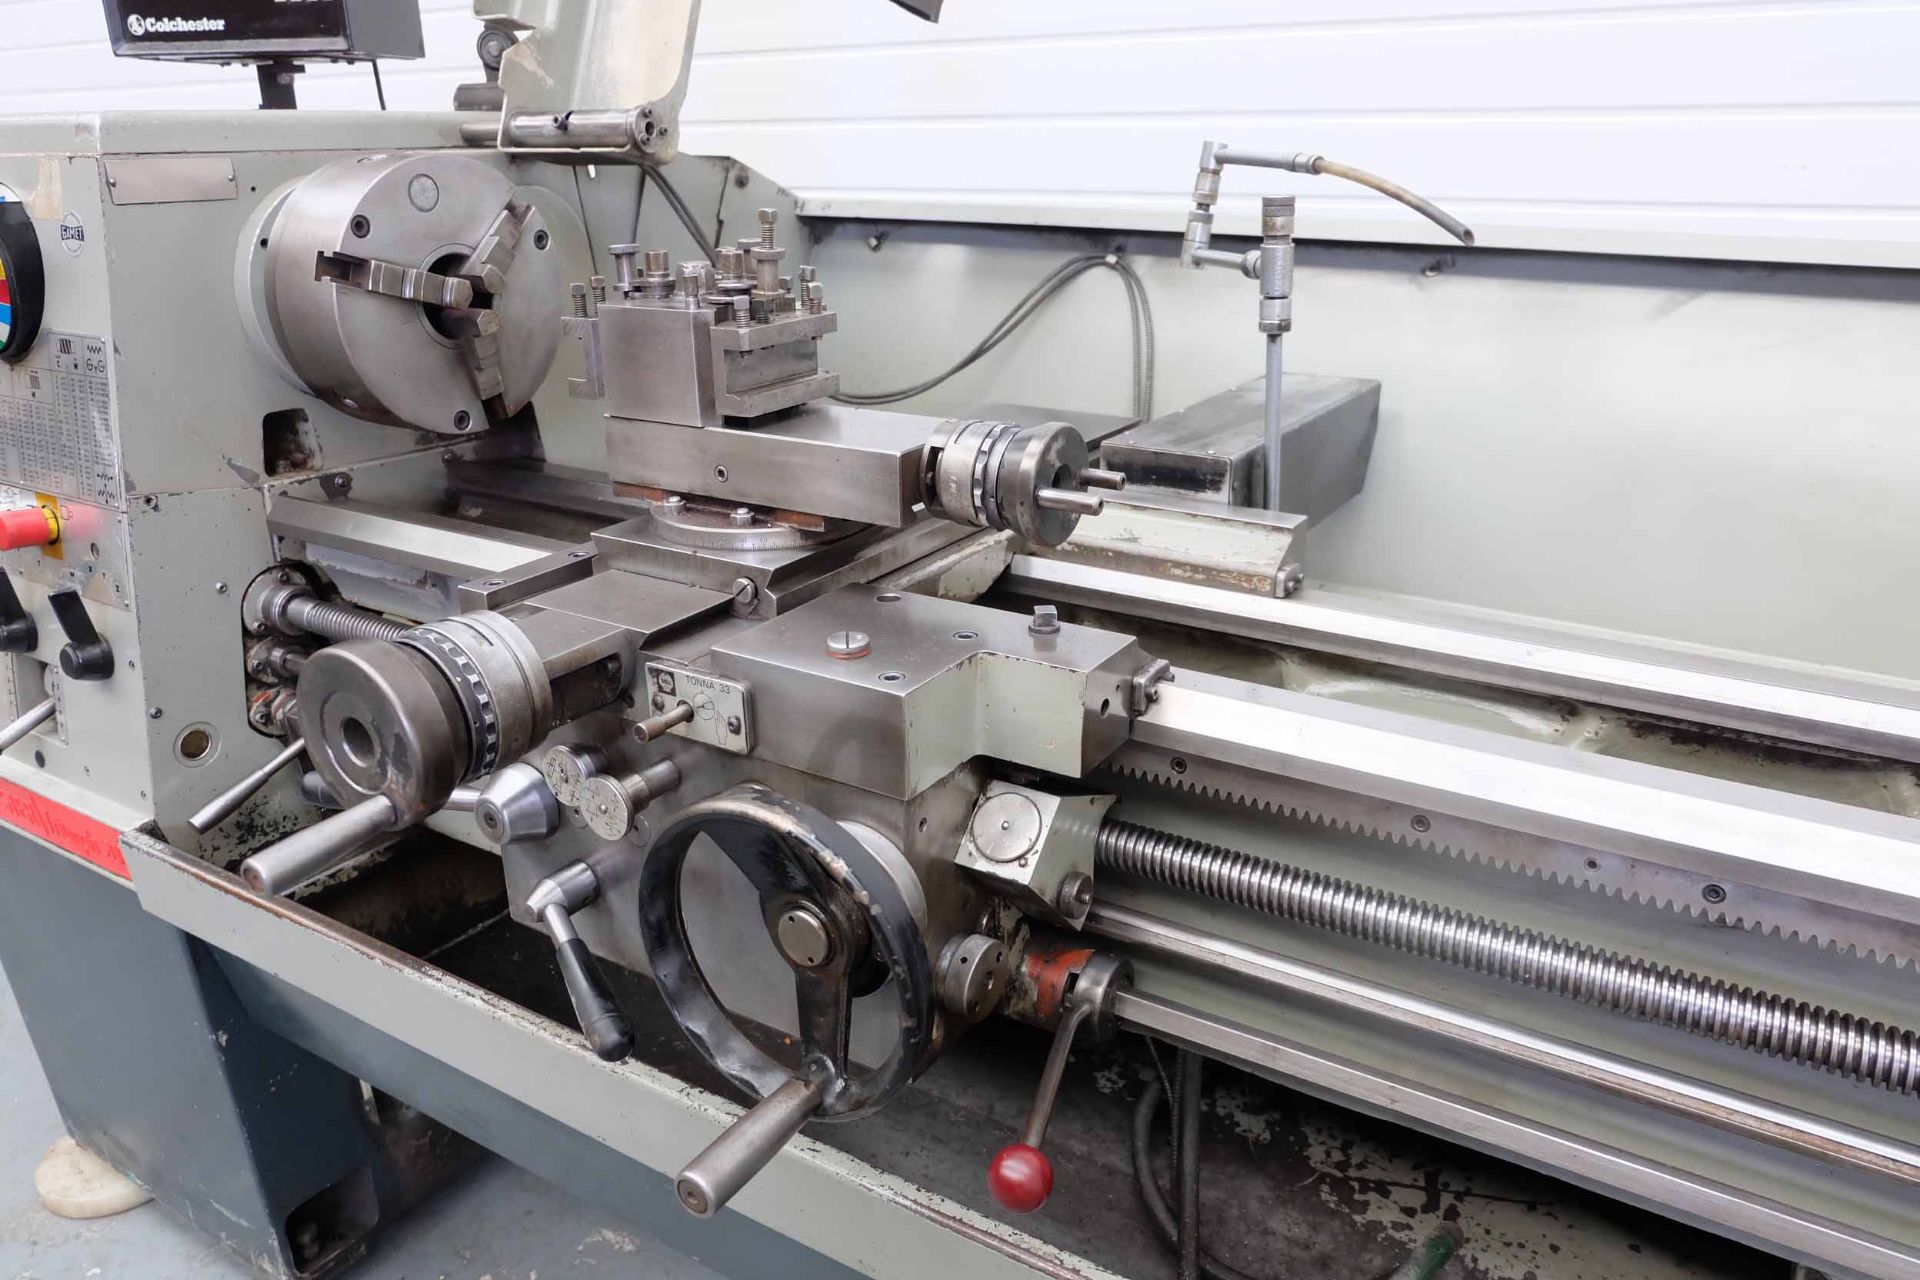 Colchester Triumph 2000 Gap Bed Centre Lathe. Admits Between Centres 50". Swing Over Bed 15 1/4". Sw - Bild 7 aus 10